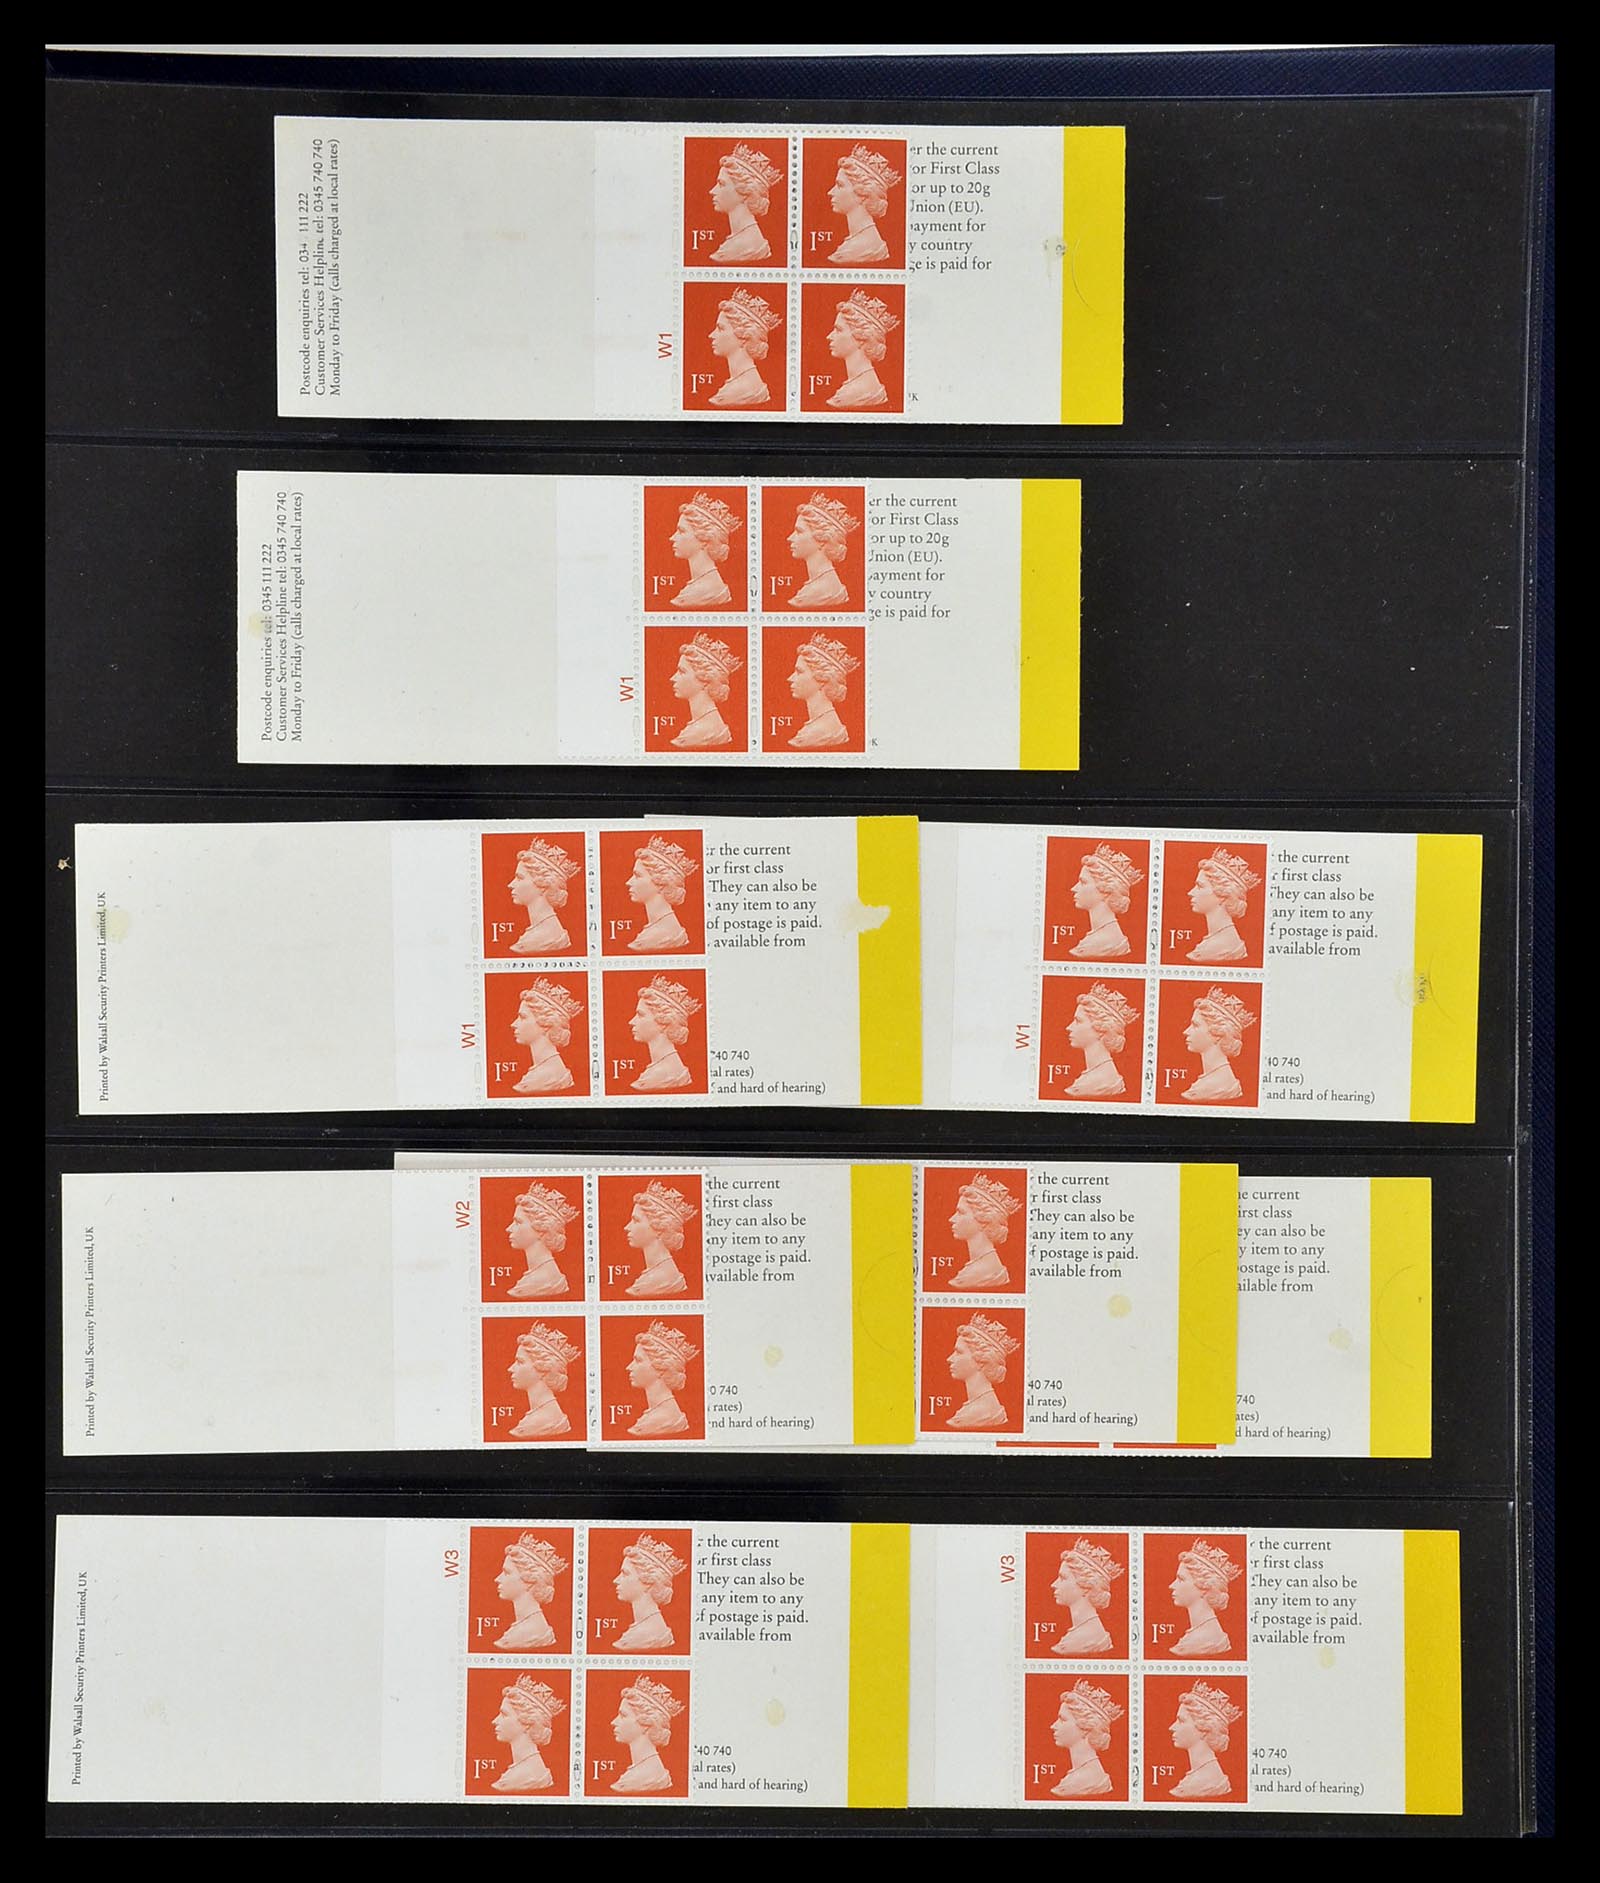 35082 024 - Stamp Collection 35082 Great Britain first class stamp booklets.